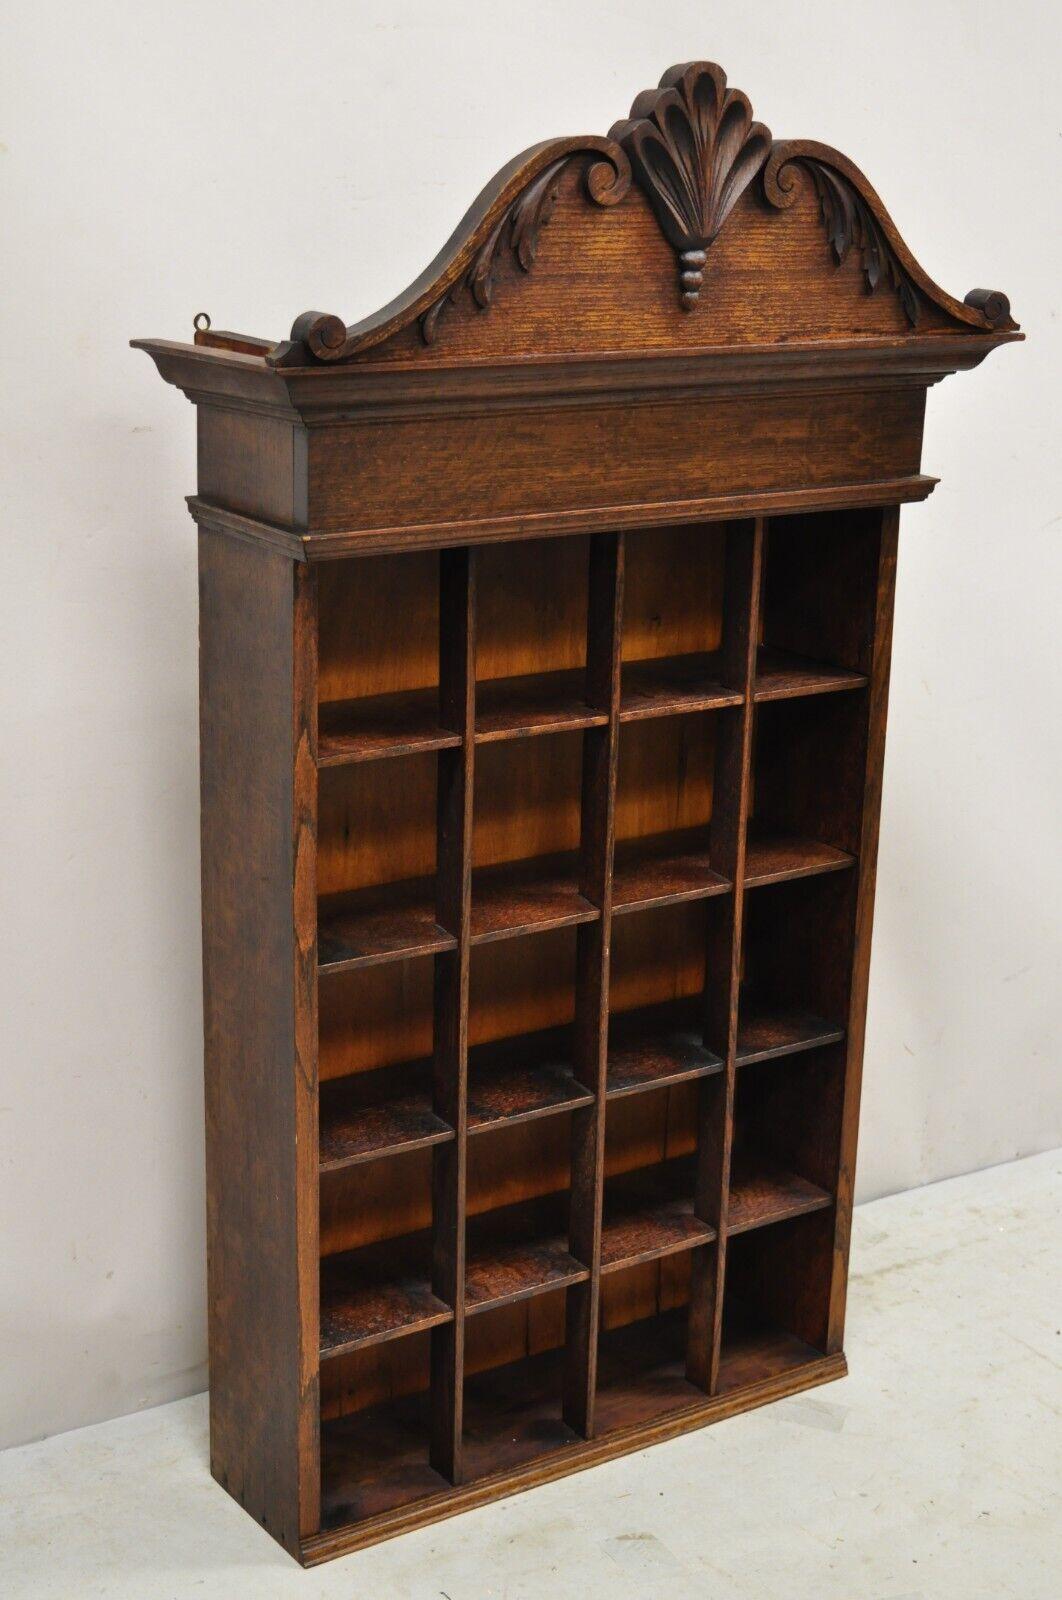 Antique Victorian oak wood 20 section wall display cabinet shaving mug rack. Item features a nicely carved pediment, 20 cubby holes, beautiful wood grain, very nice antique item, quality American craftsmanship, great style and form. circa 19th